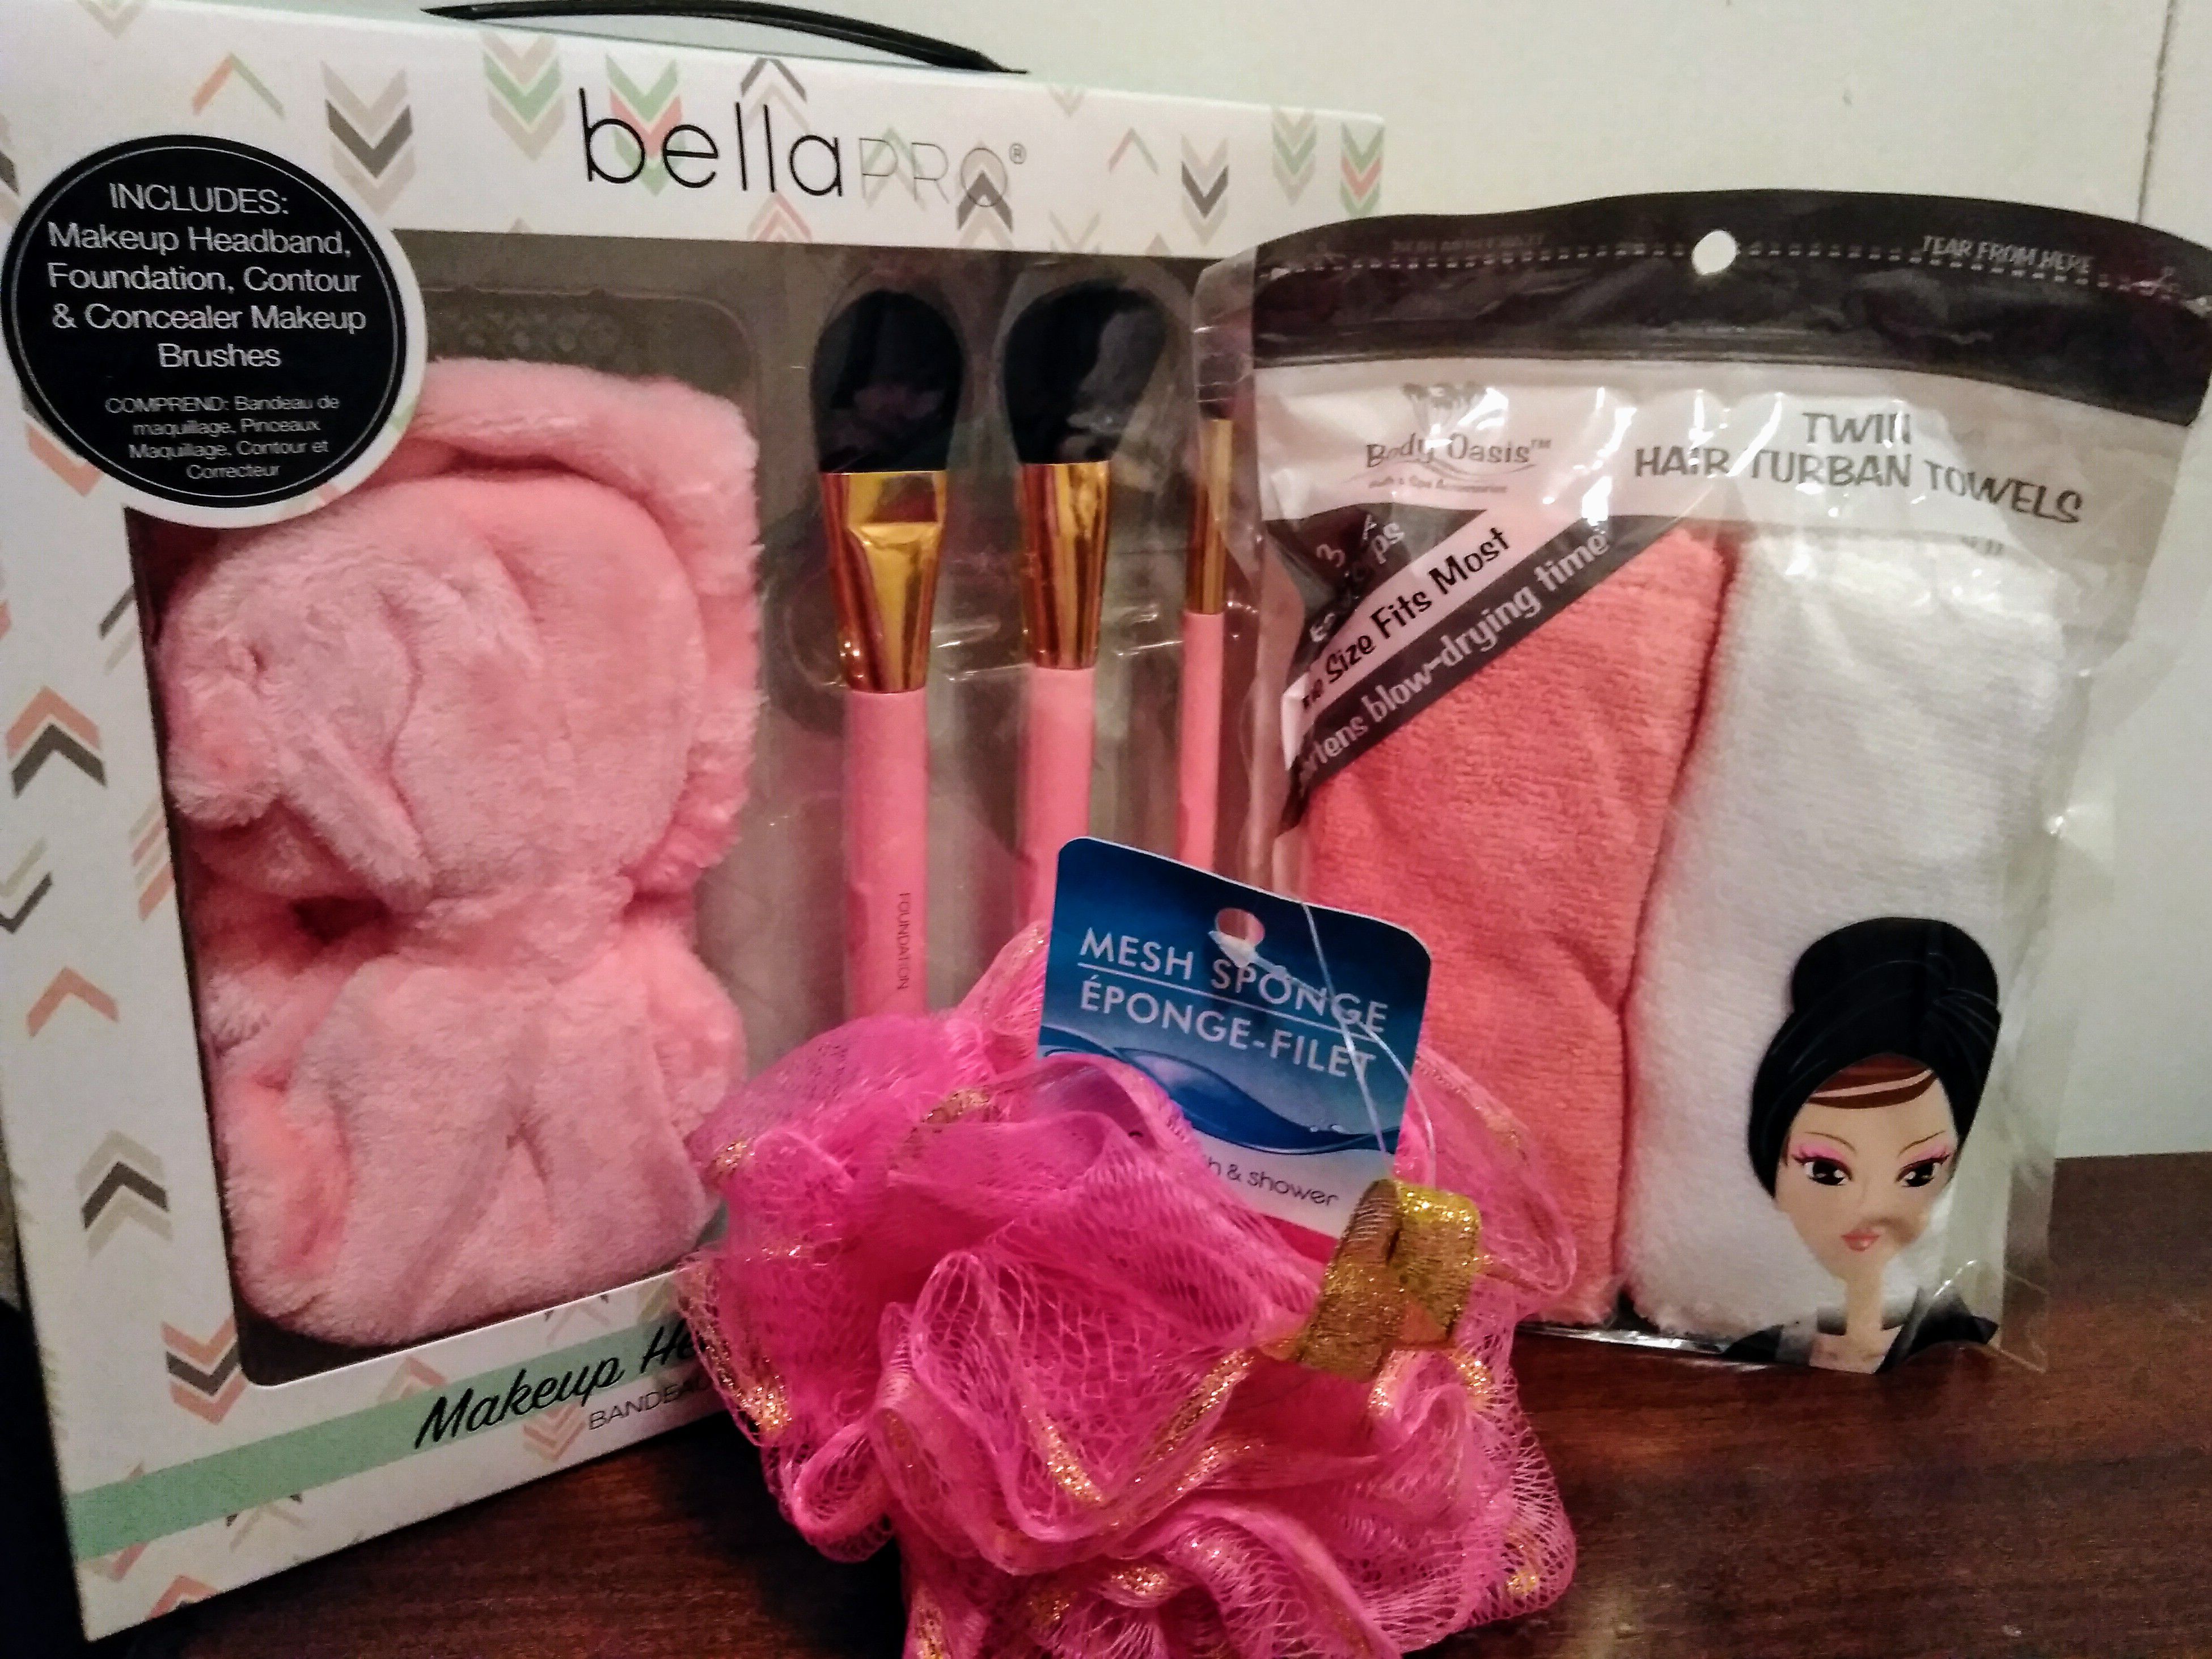 $14 OBO New never used Bella Pro Pink Makeup Brush & plush headband kit, 2 turban towels & a deluxe pink scrubber lot